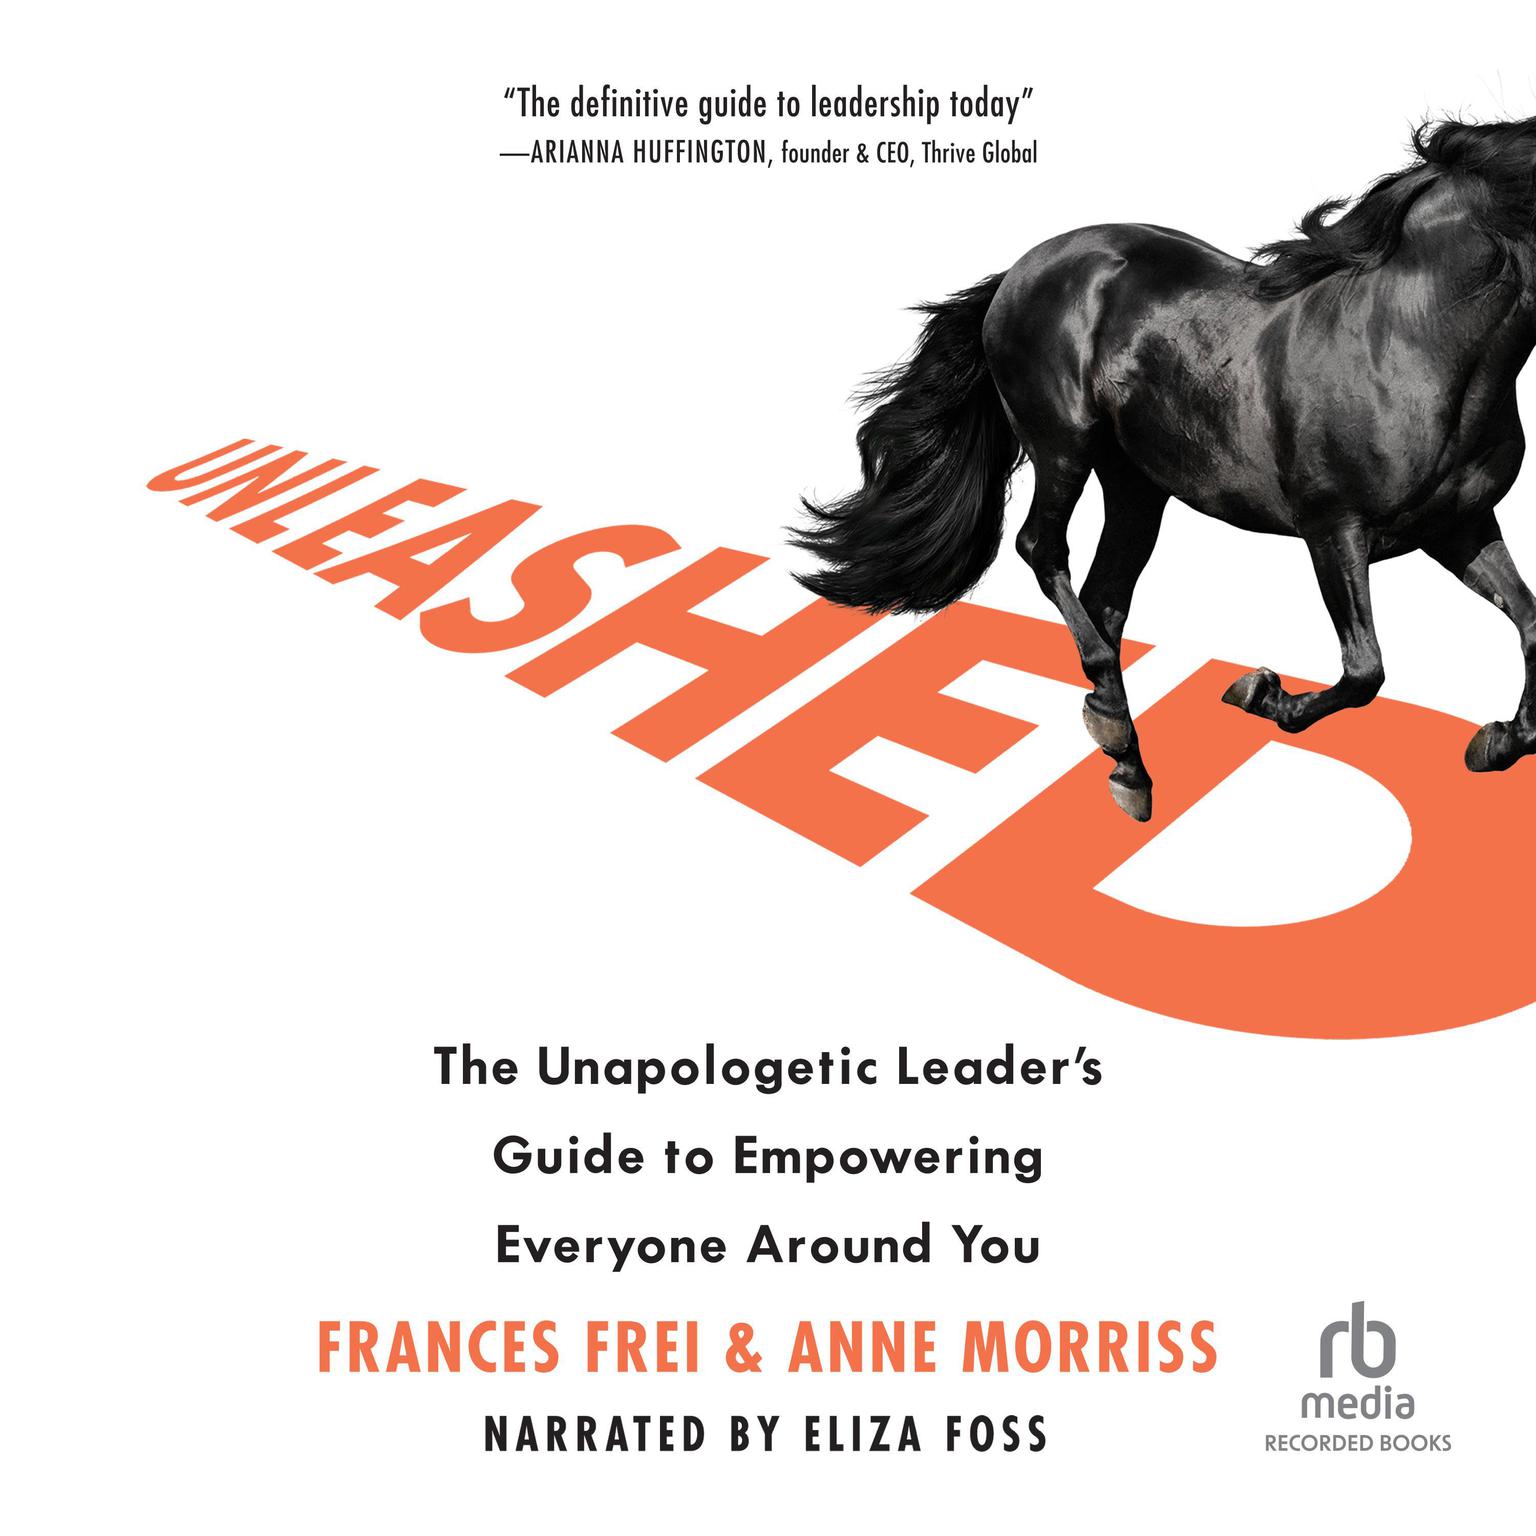 Unleashed: The Unapologetic Leaders Guide to Empowering Everyone Around You Audiobook, by Frances Frei